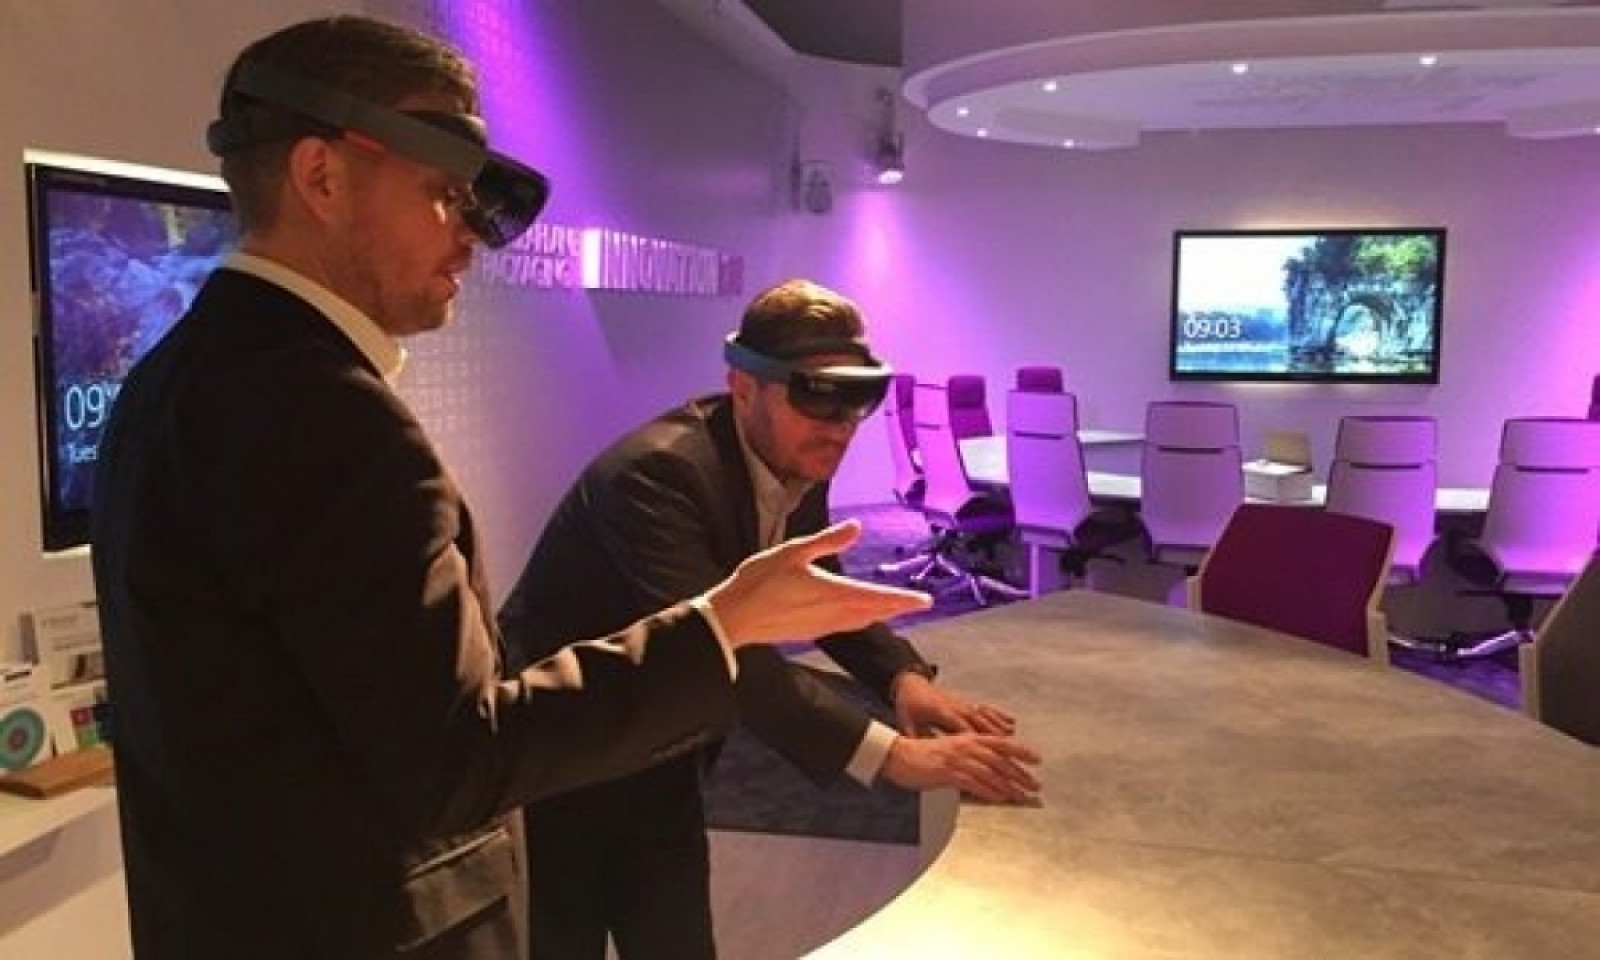 HoloLens technology launches at the Innovation Lab